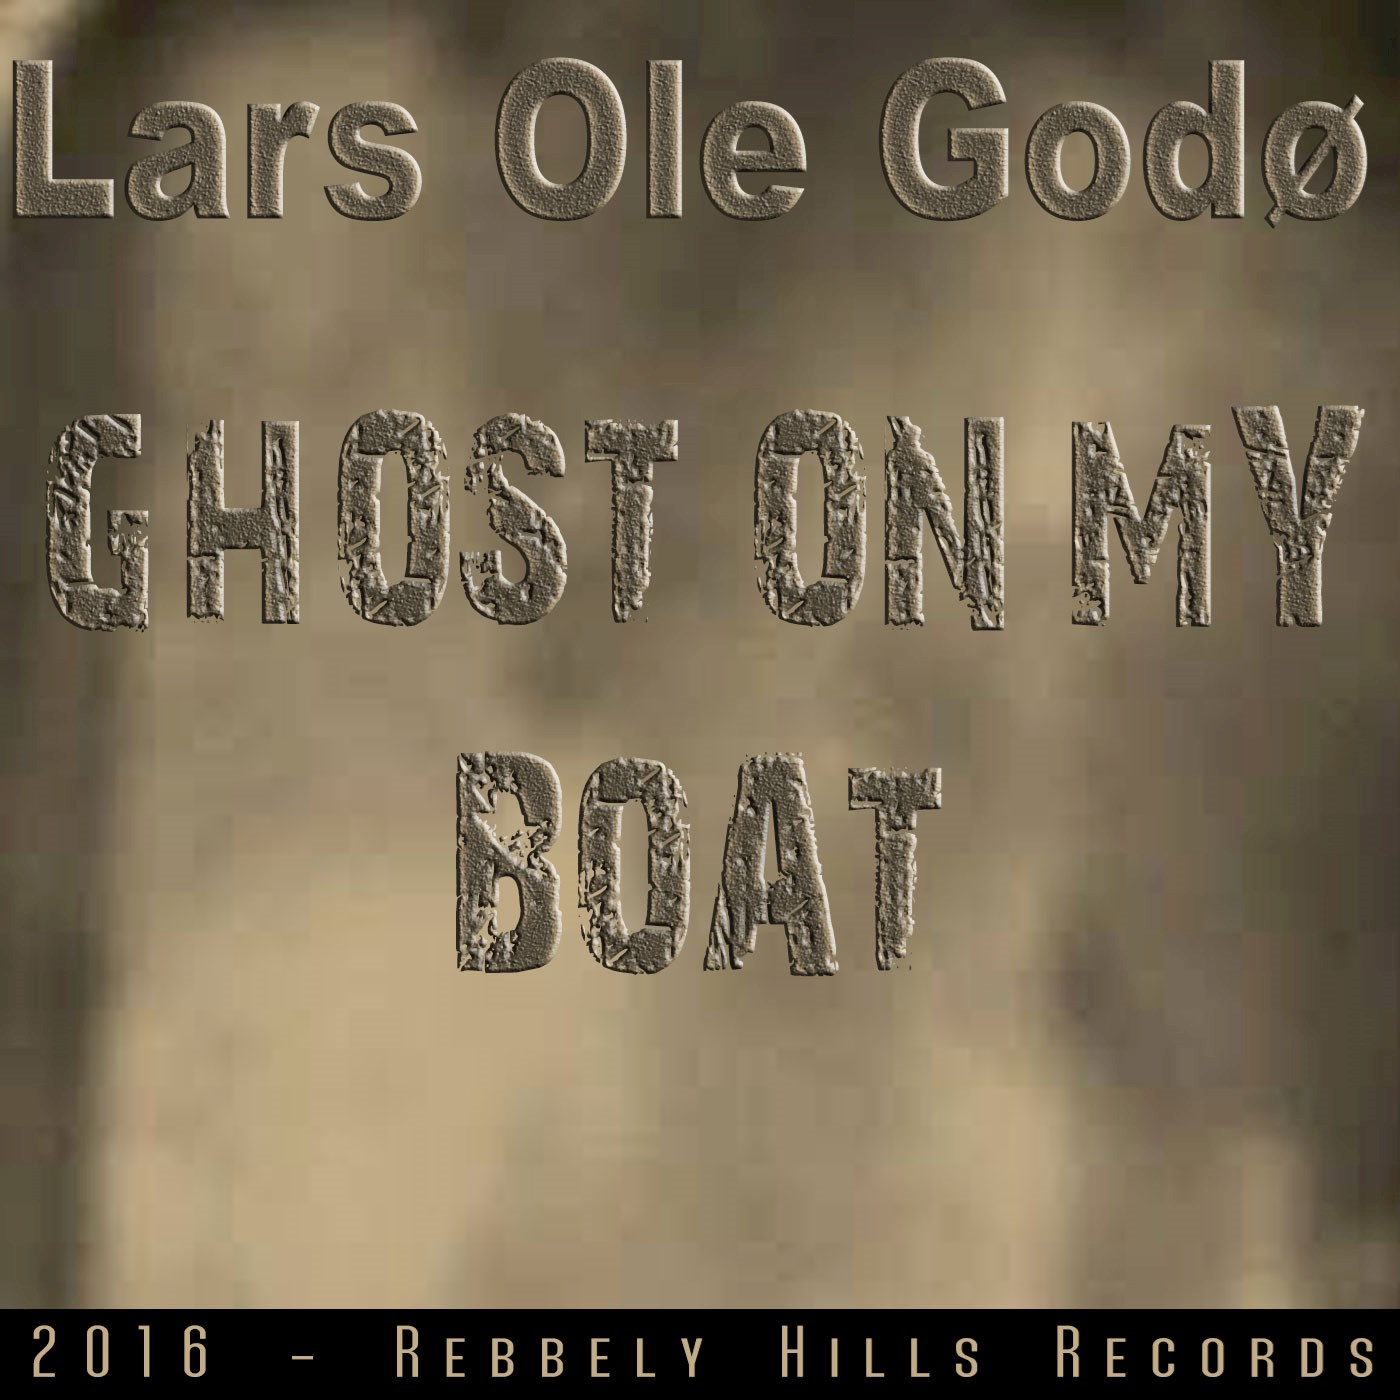 Ghost on my boat